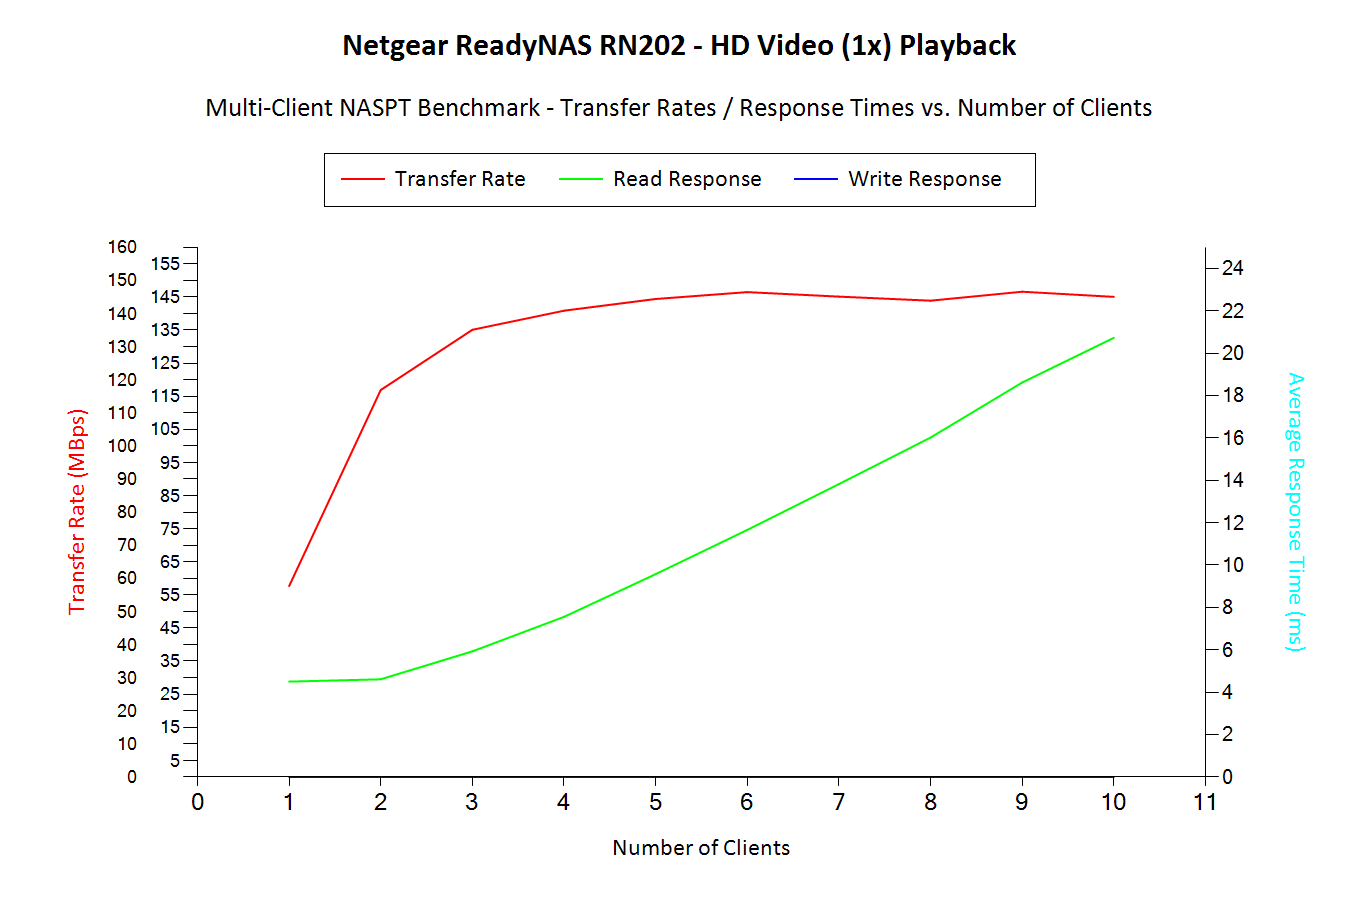 HD Video (1x) Playback - Multi-Client Benchmark